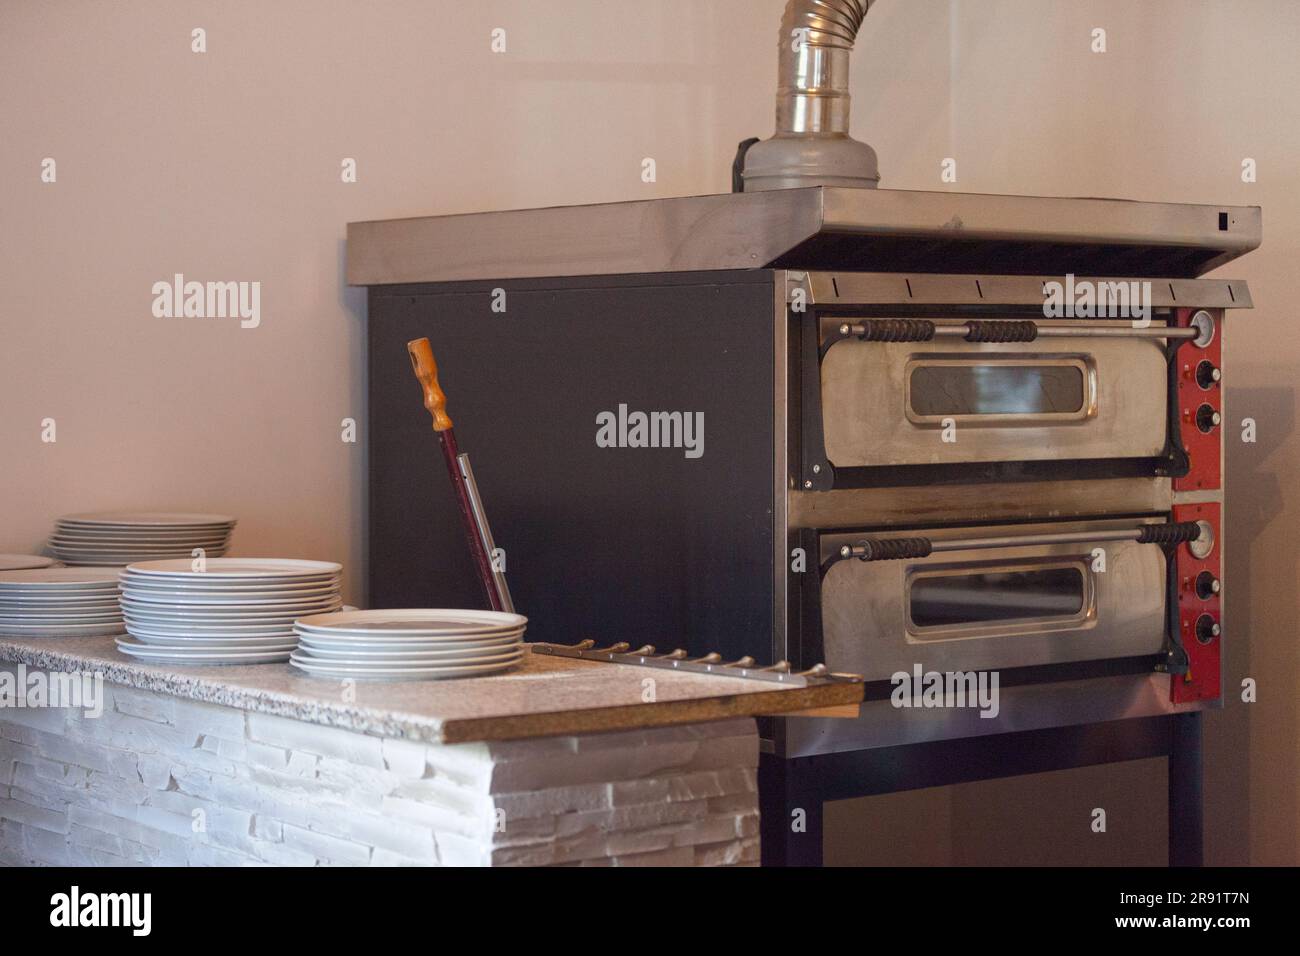 Pizza oven with on its side, a pizza peel and a counter fool of pizza plates. Stock Photo